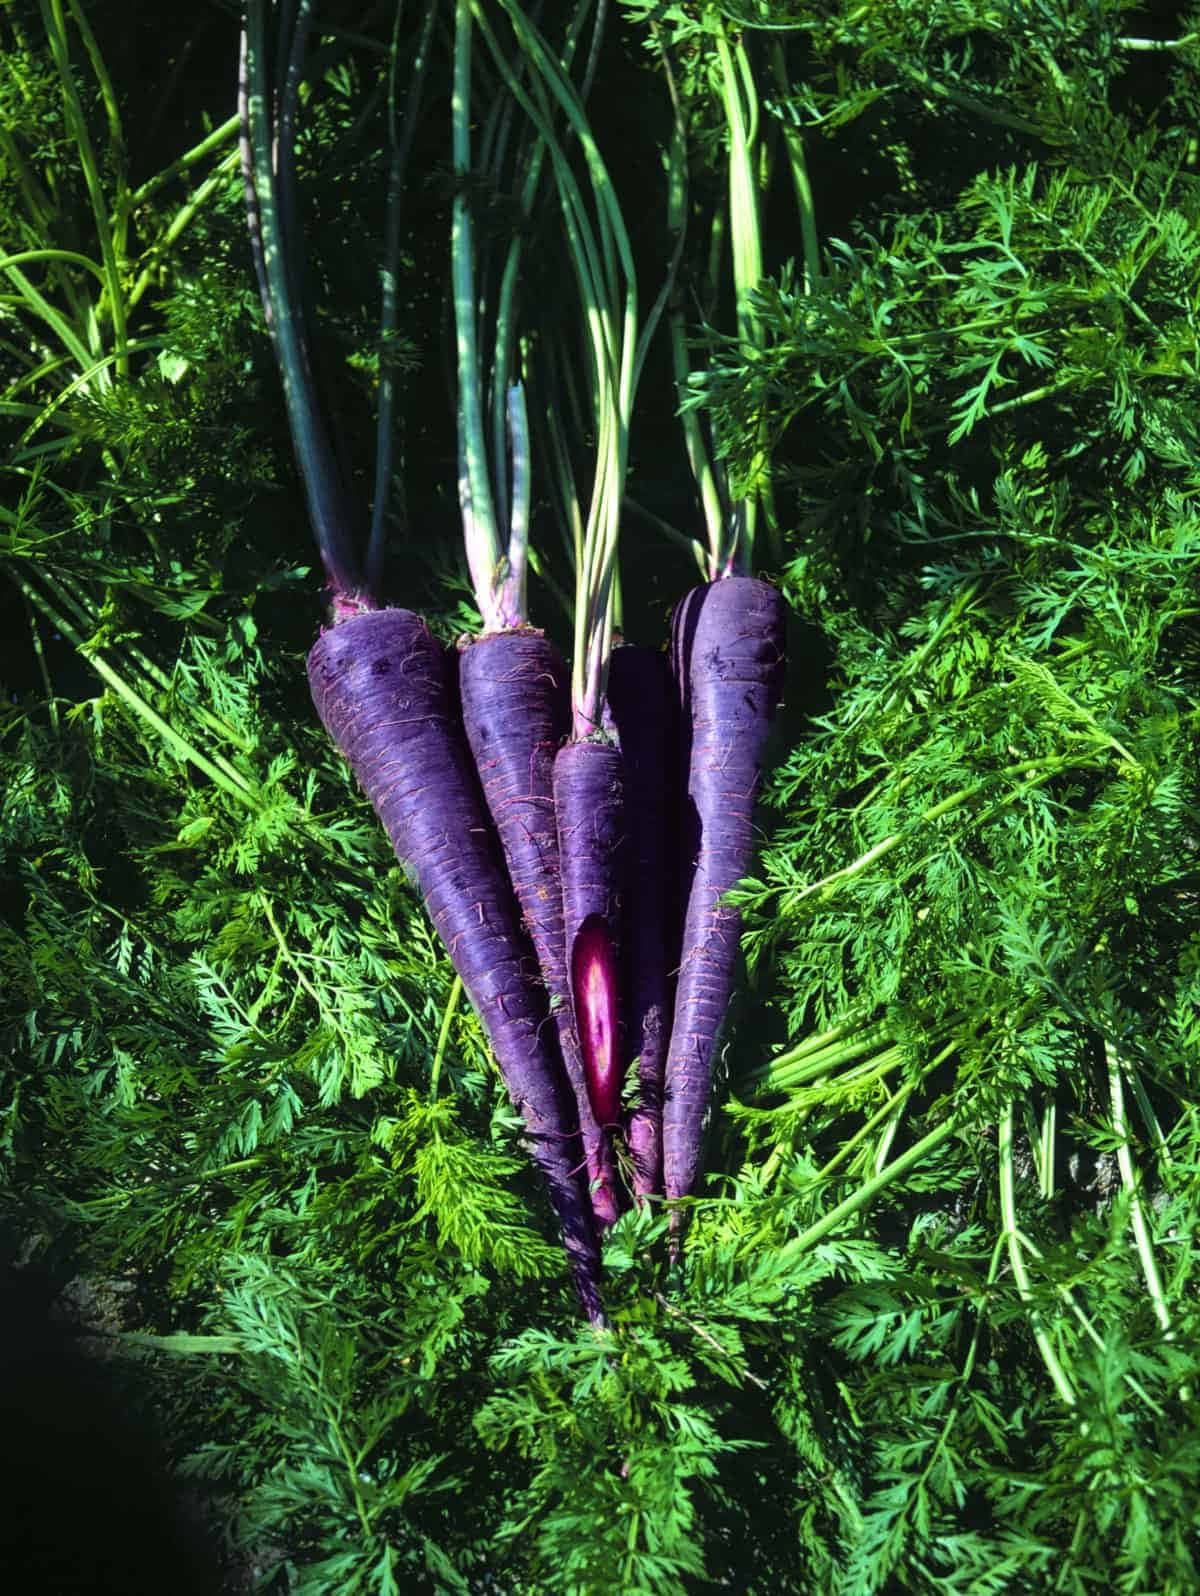 Image  “Purple Carrots Make a Healthy and Colourful Choice” Wallpaper